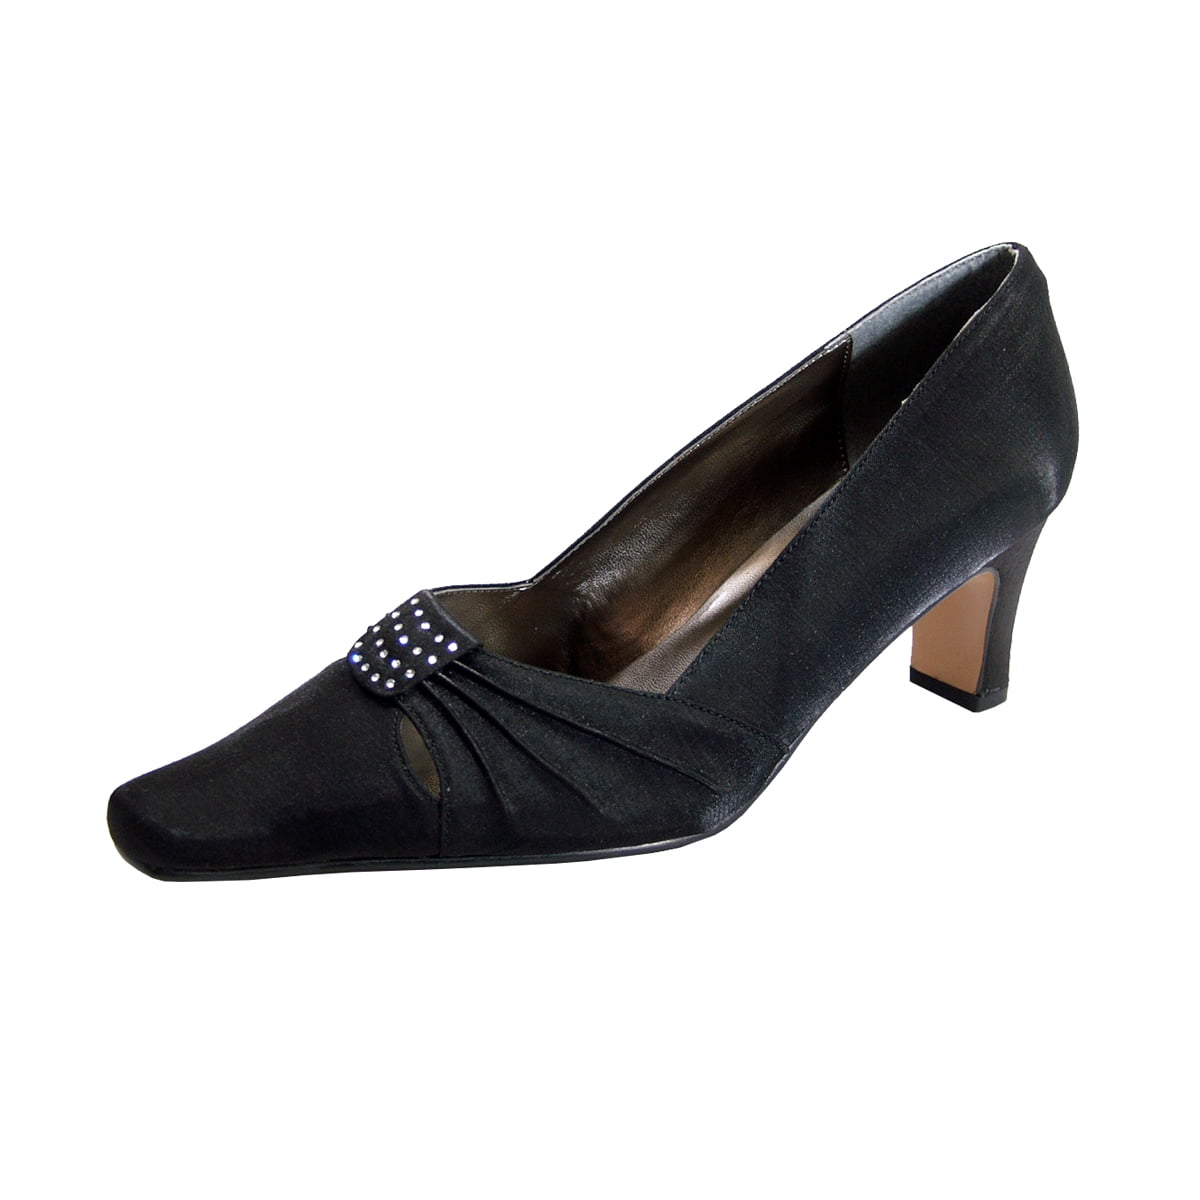 wide dress shoes for women